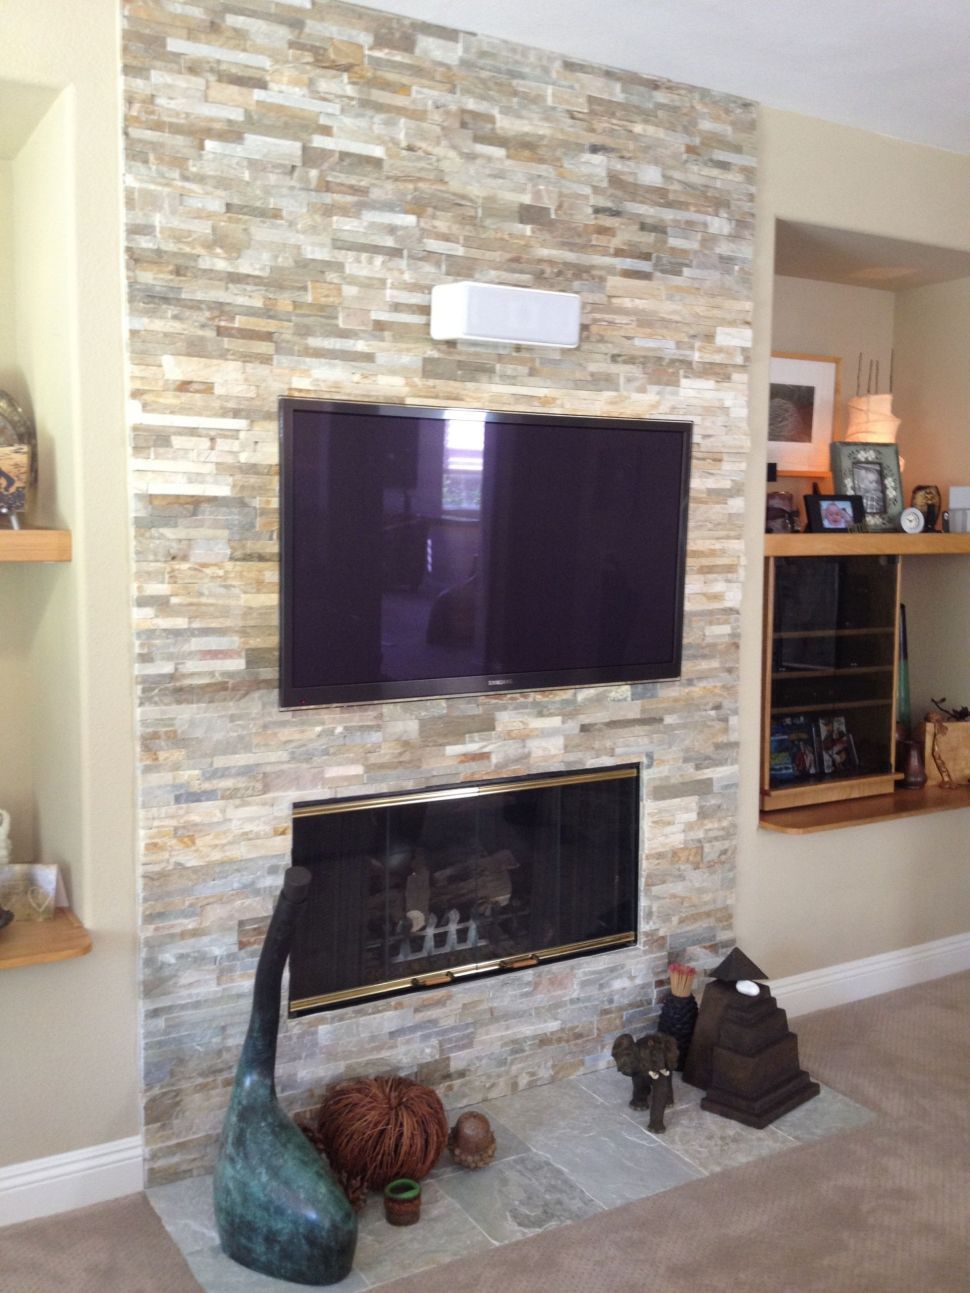 Wall Units with Fireplaces Unique Extraordinary Creative Tv Wall Mounting Ideas Have Help